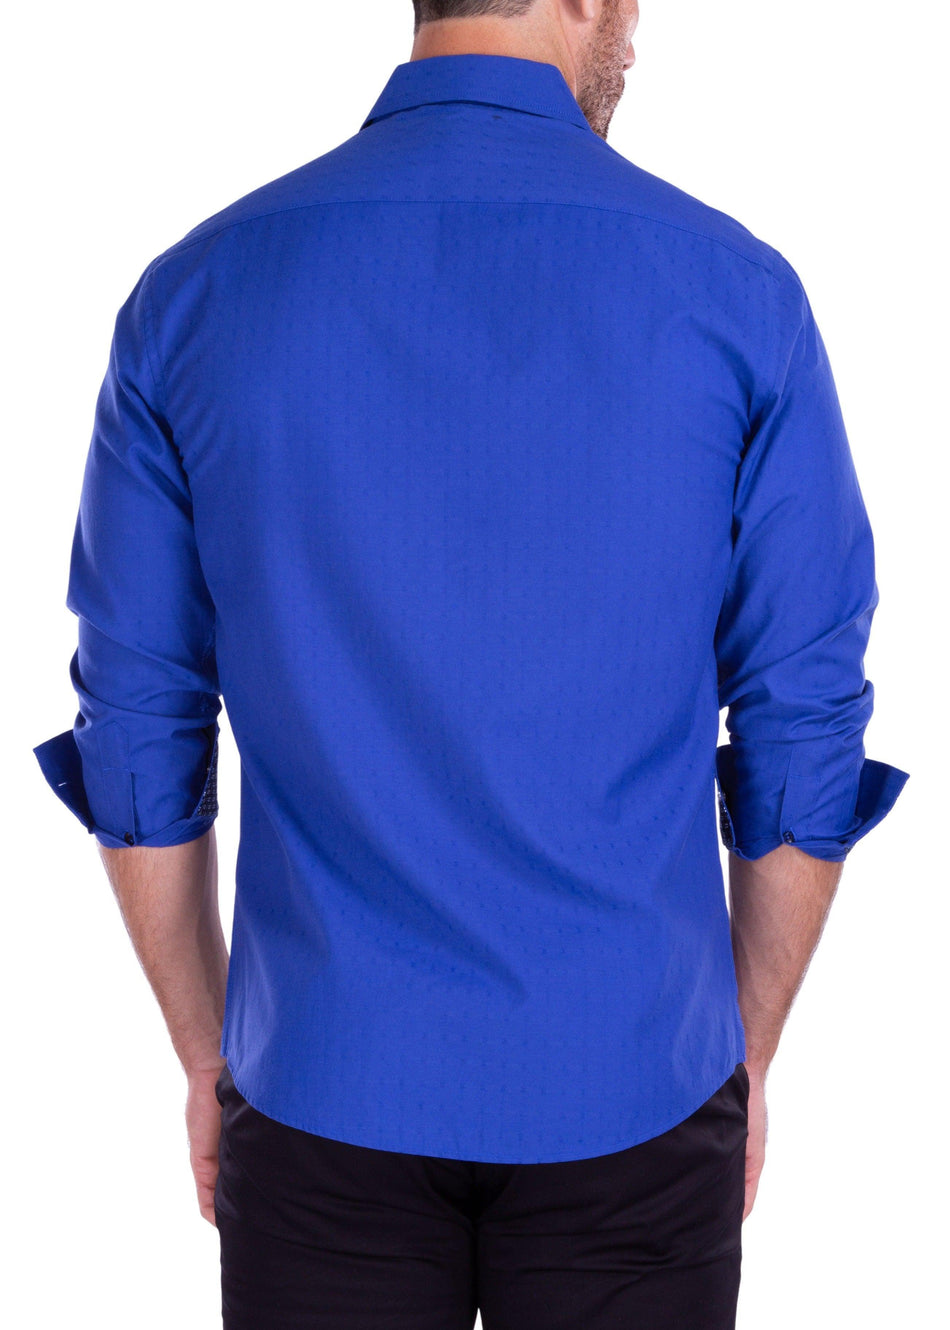 Dotted Texture Long Sleeve Dress Shirt Solid Royal Blue